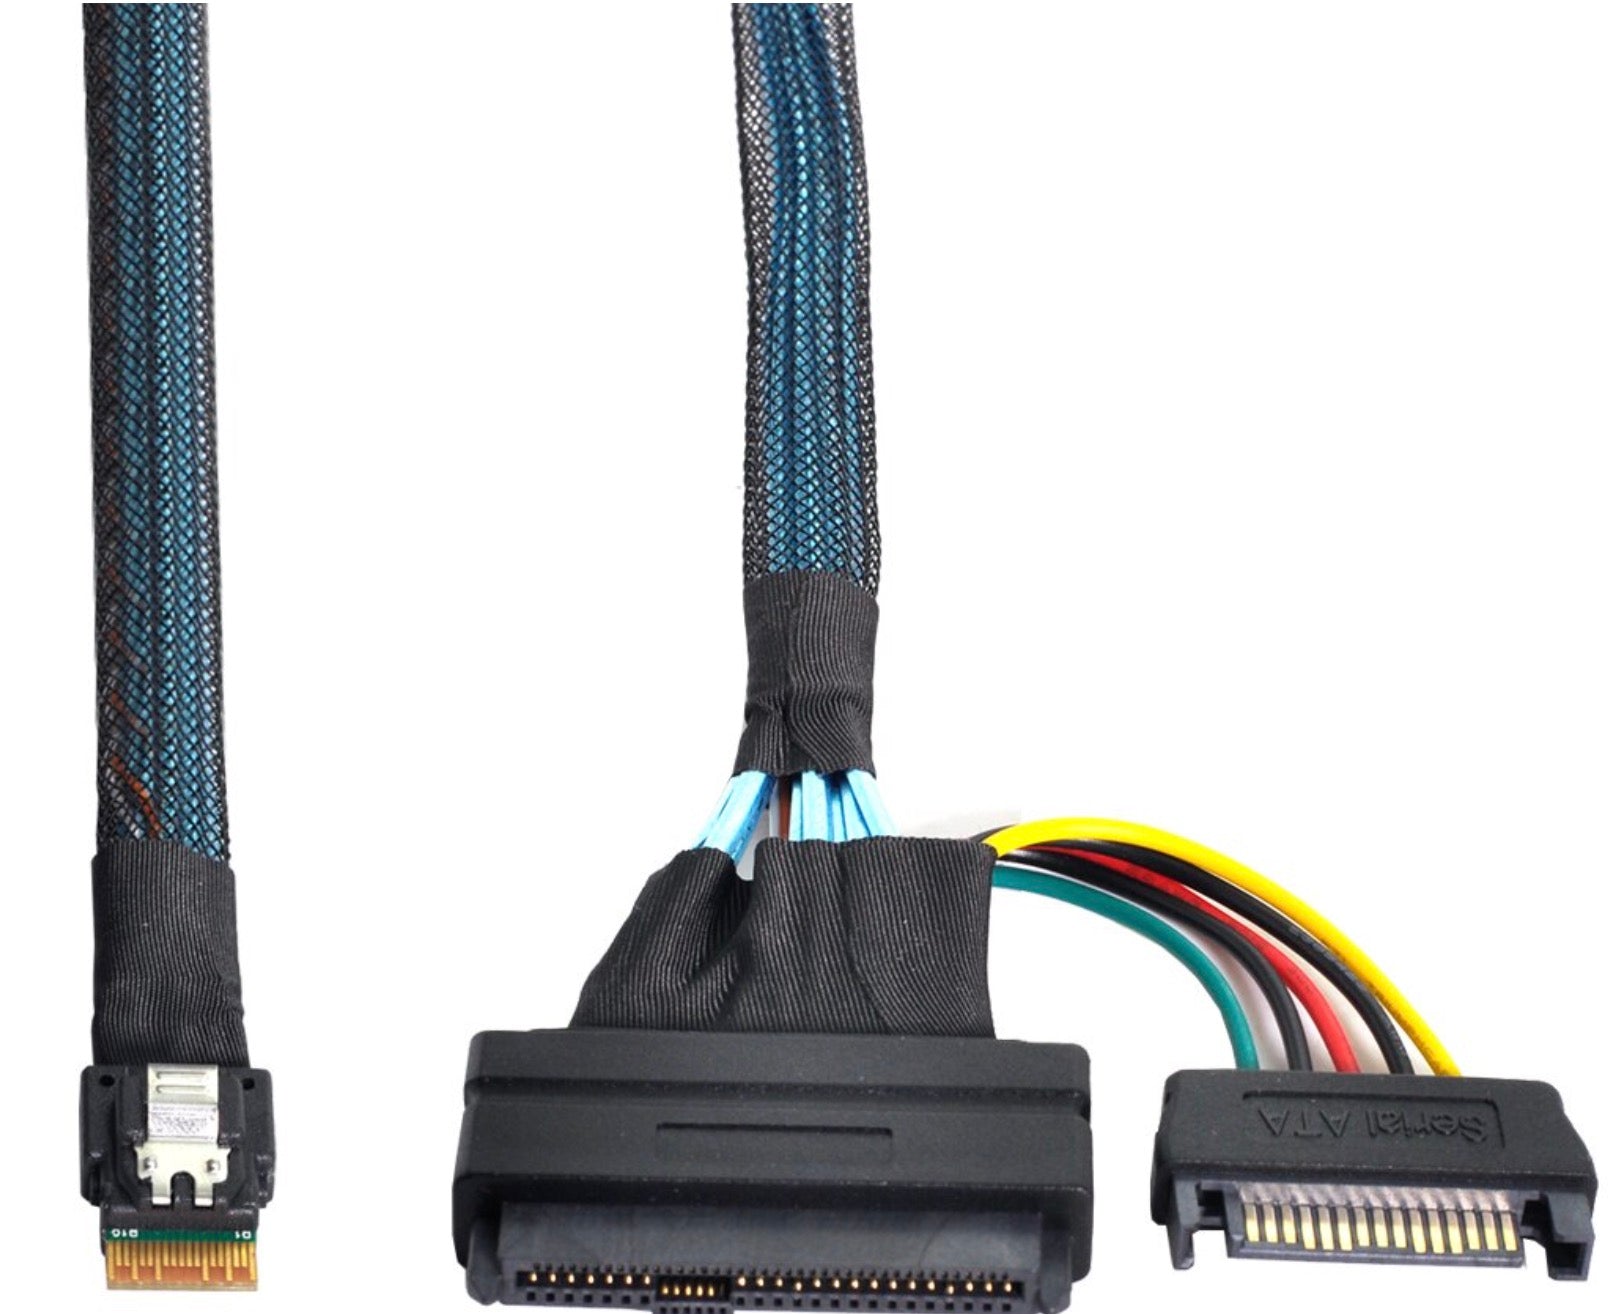 SFF-8654 4i Slim SAS 4.0 to SFF-8639 SSD Cable NVME U.2 with 15 Pin SATA Power Cable 0.5m